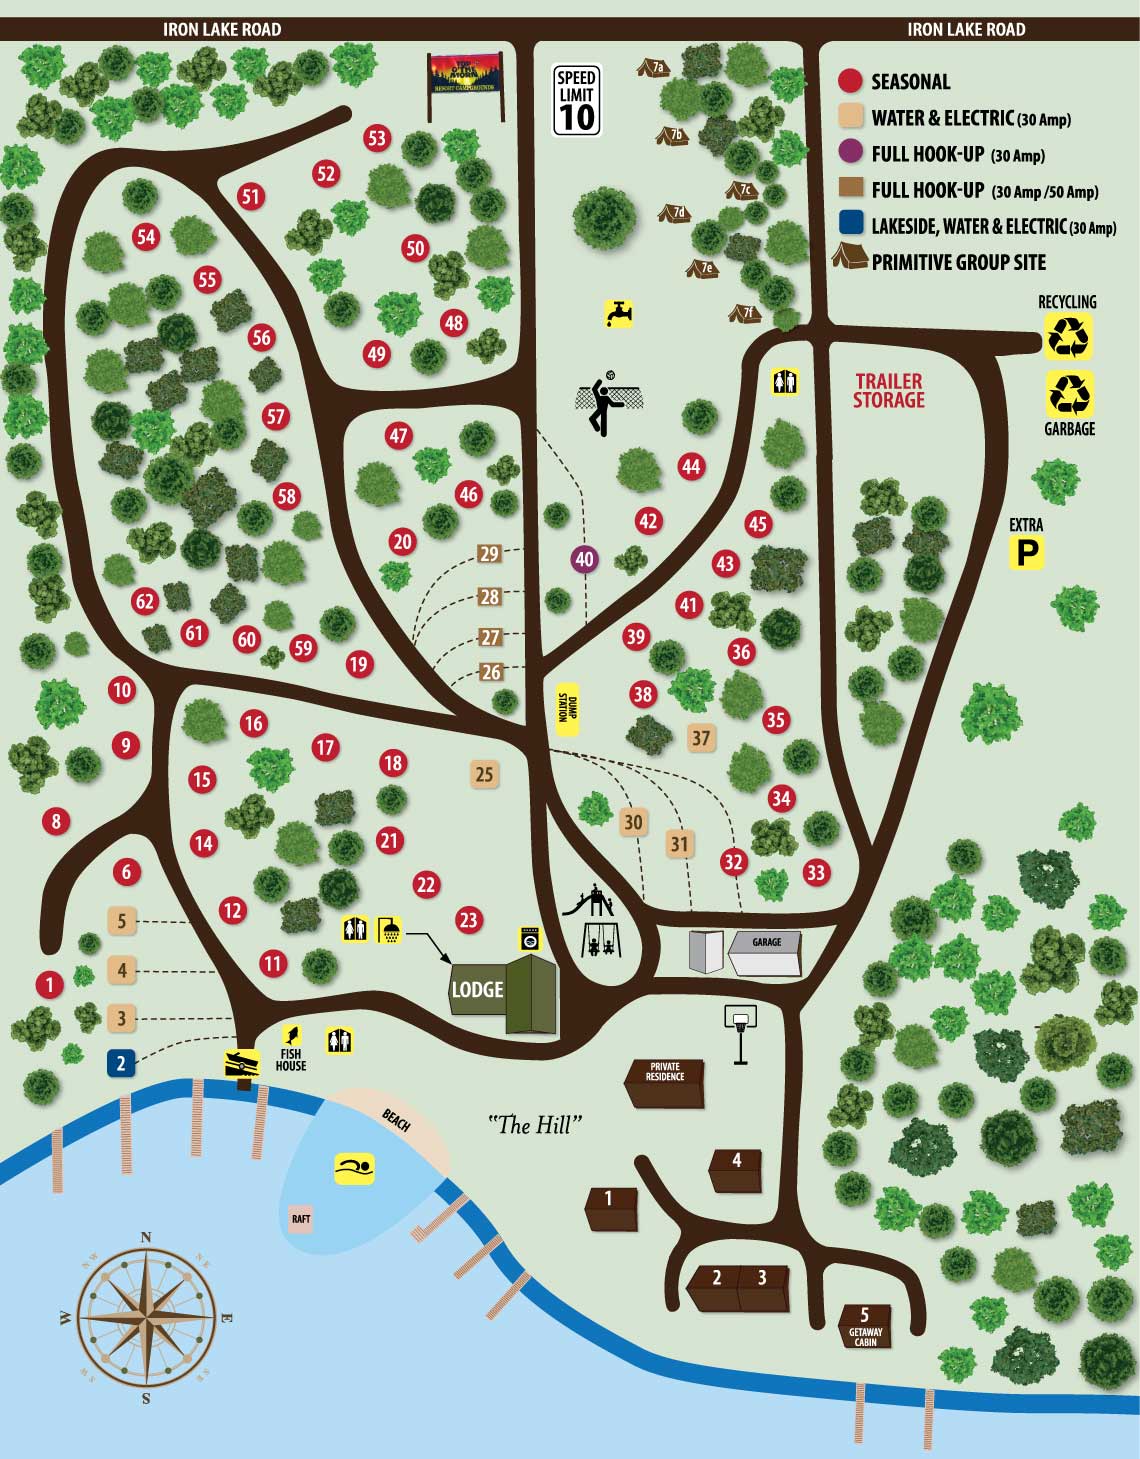 Top O' the Morn Campground Map